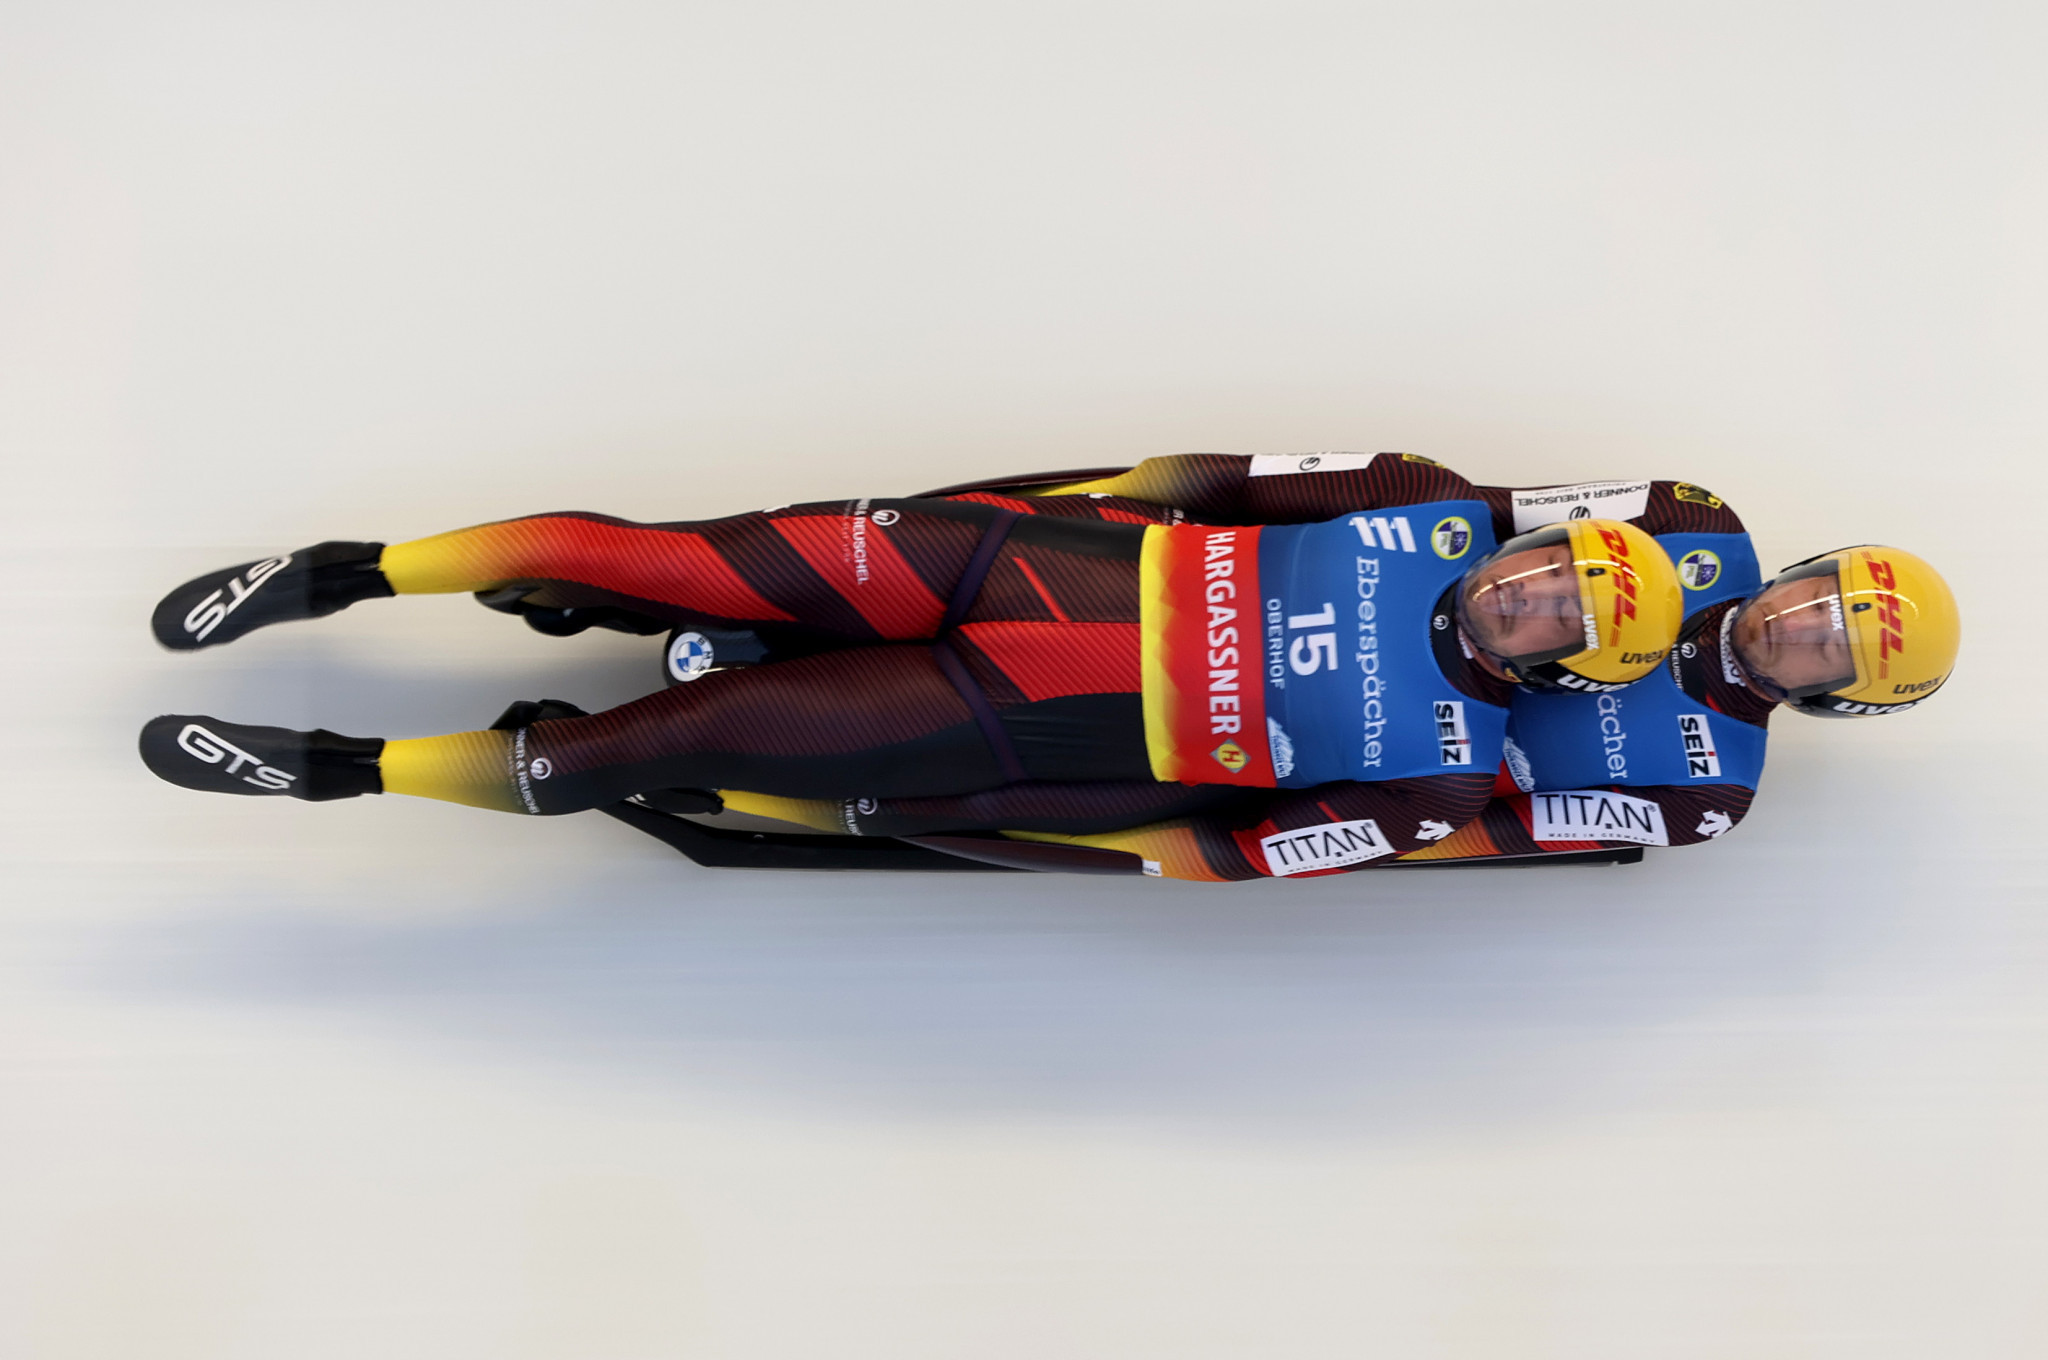 Tobias Wendl and Tobias Arlt triumphed in the men's doubles at the Luge World Cup in Winterberg ©Getty Images